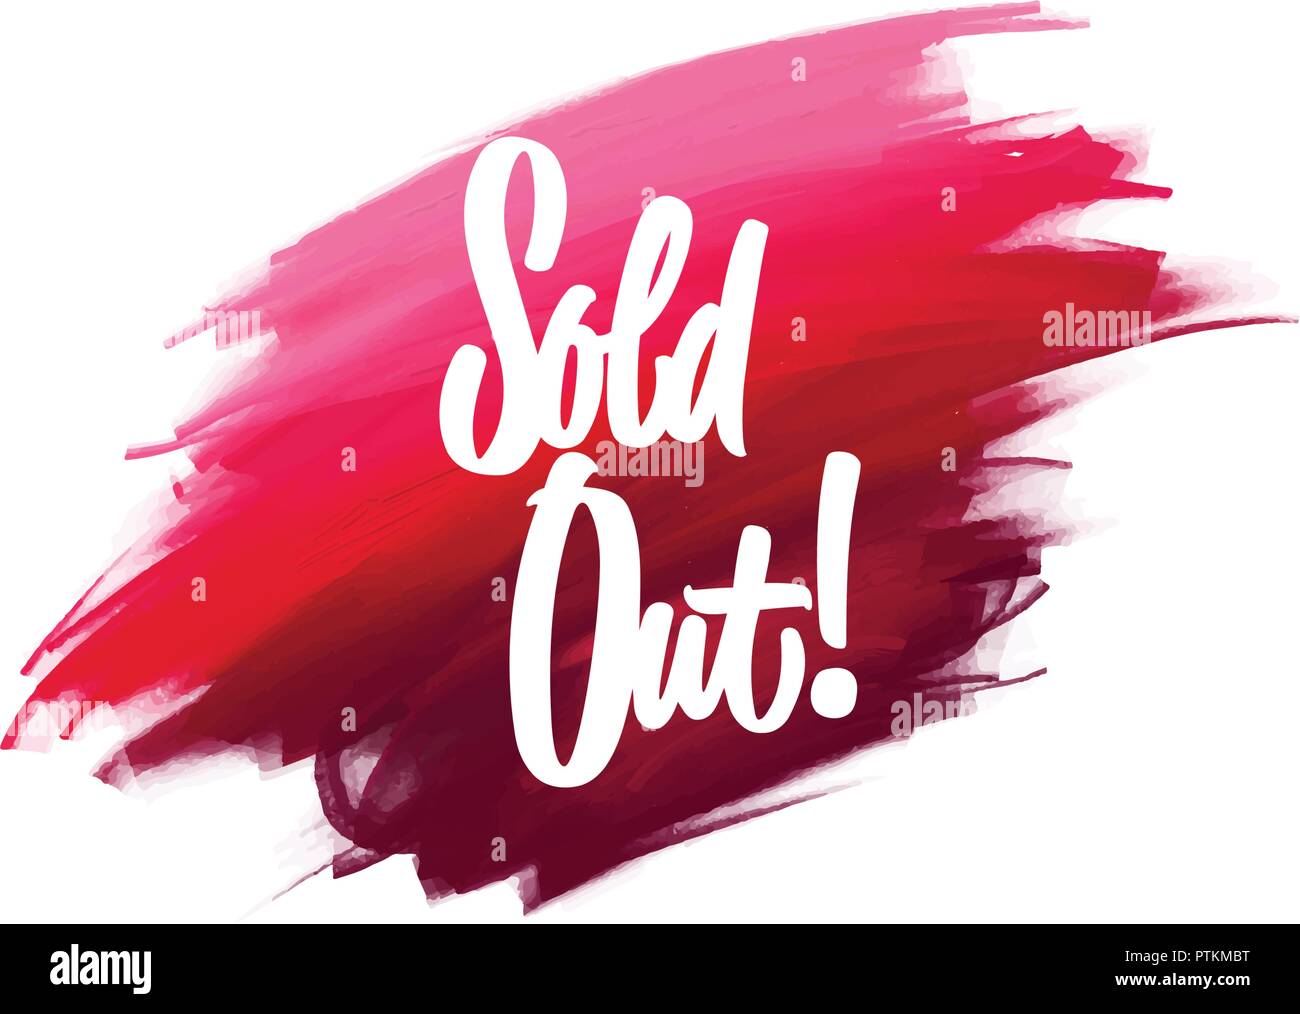 Sold out Cut Out Stock Images & Pictures - Alamy